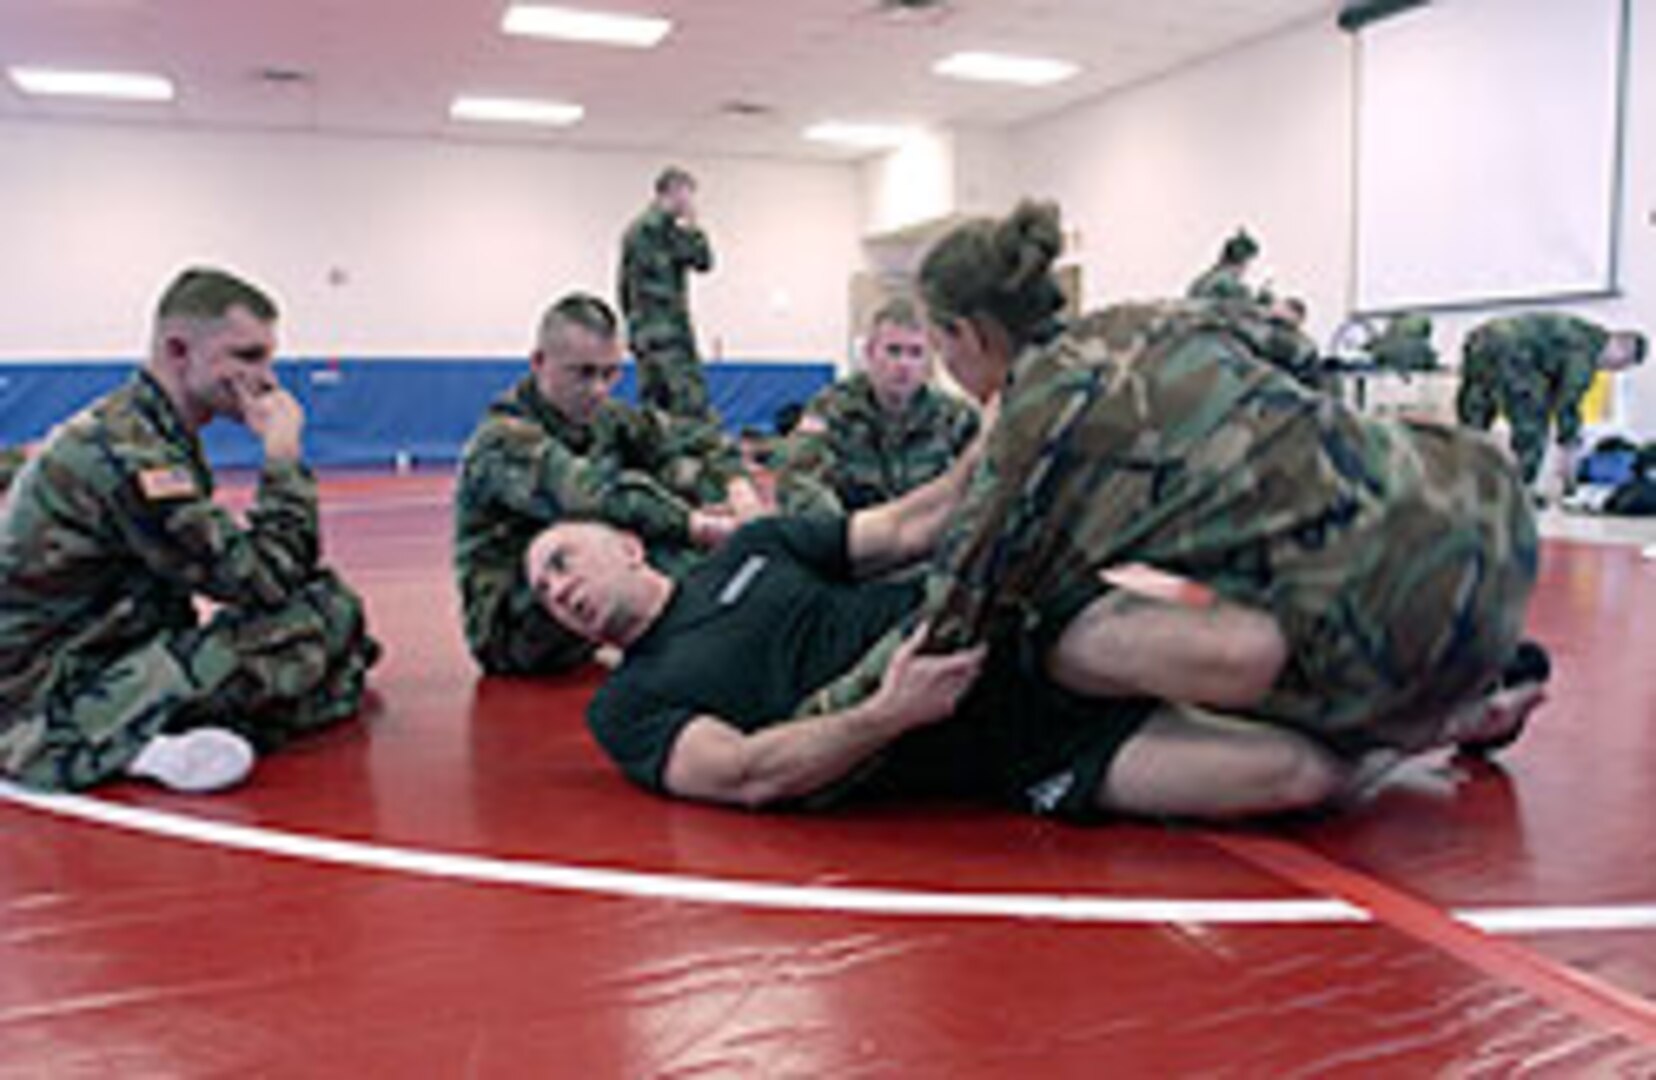 Level III combatives instructor, Sgt. 1st Class Jeffery Malloch, demonstrates a combatives move for students of the Pennsylvania Army National Guard at Fort Indiantown Gap, Pa.